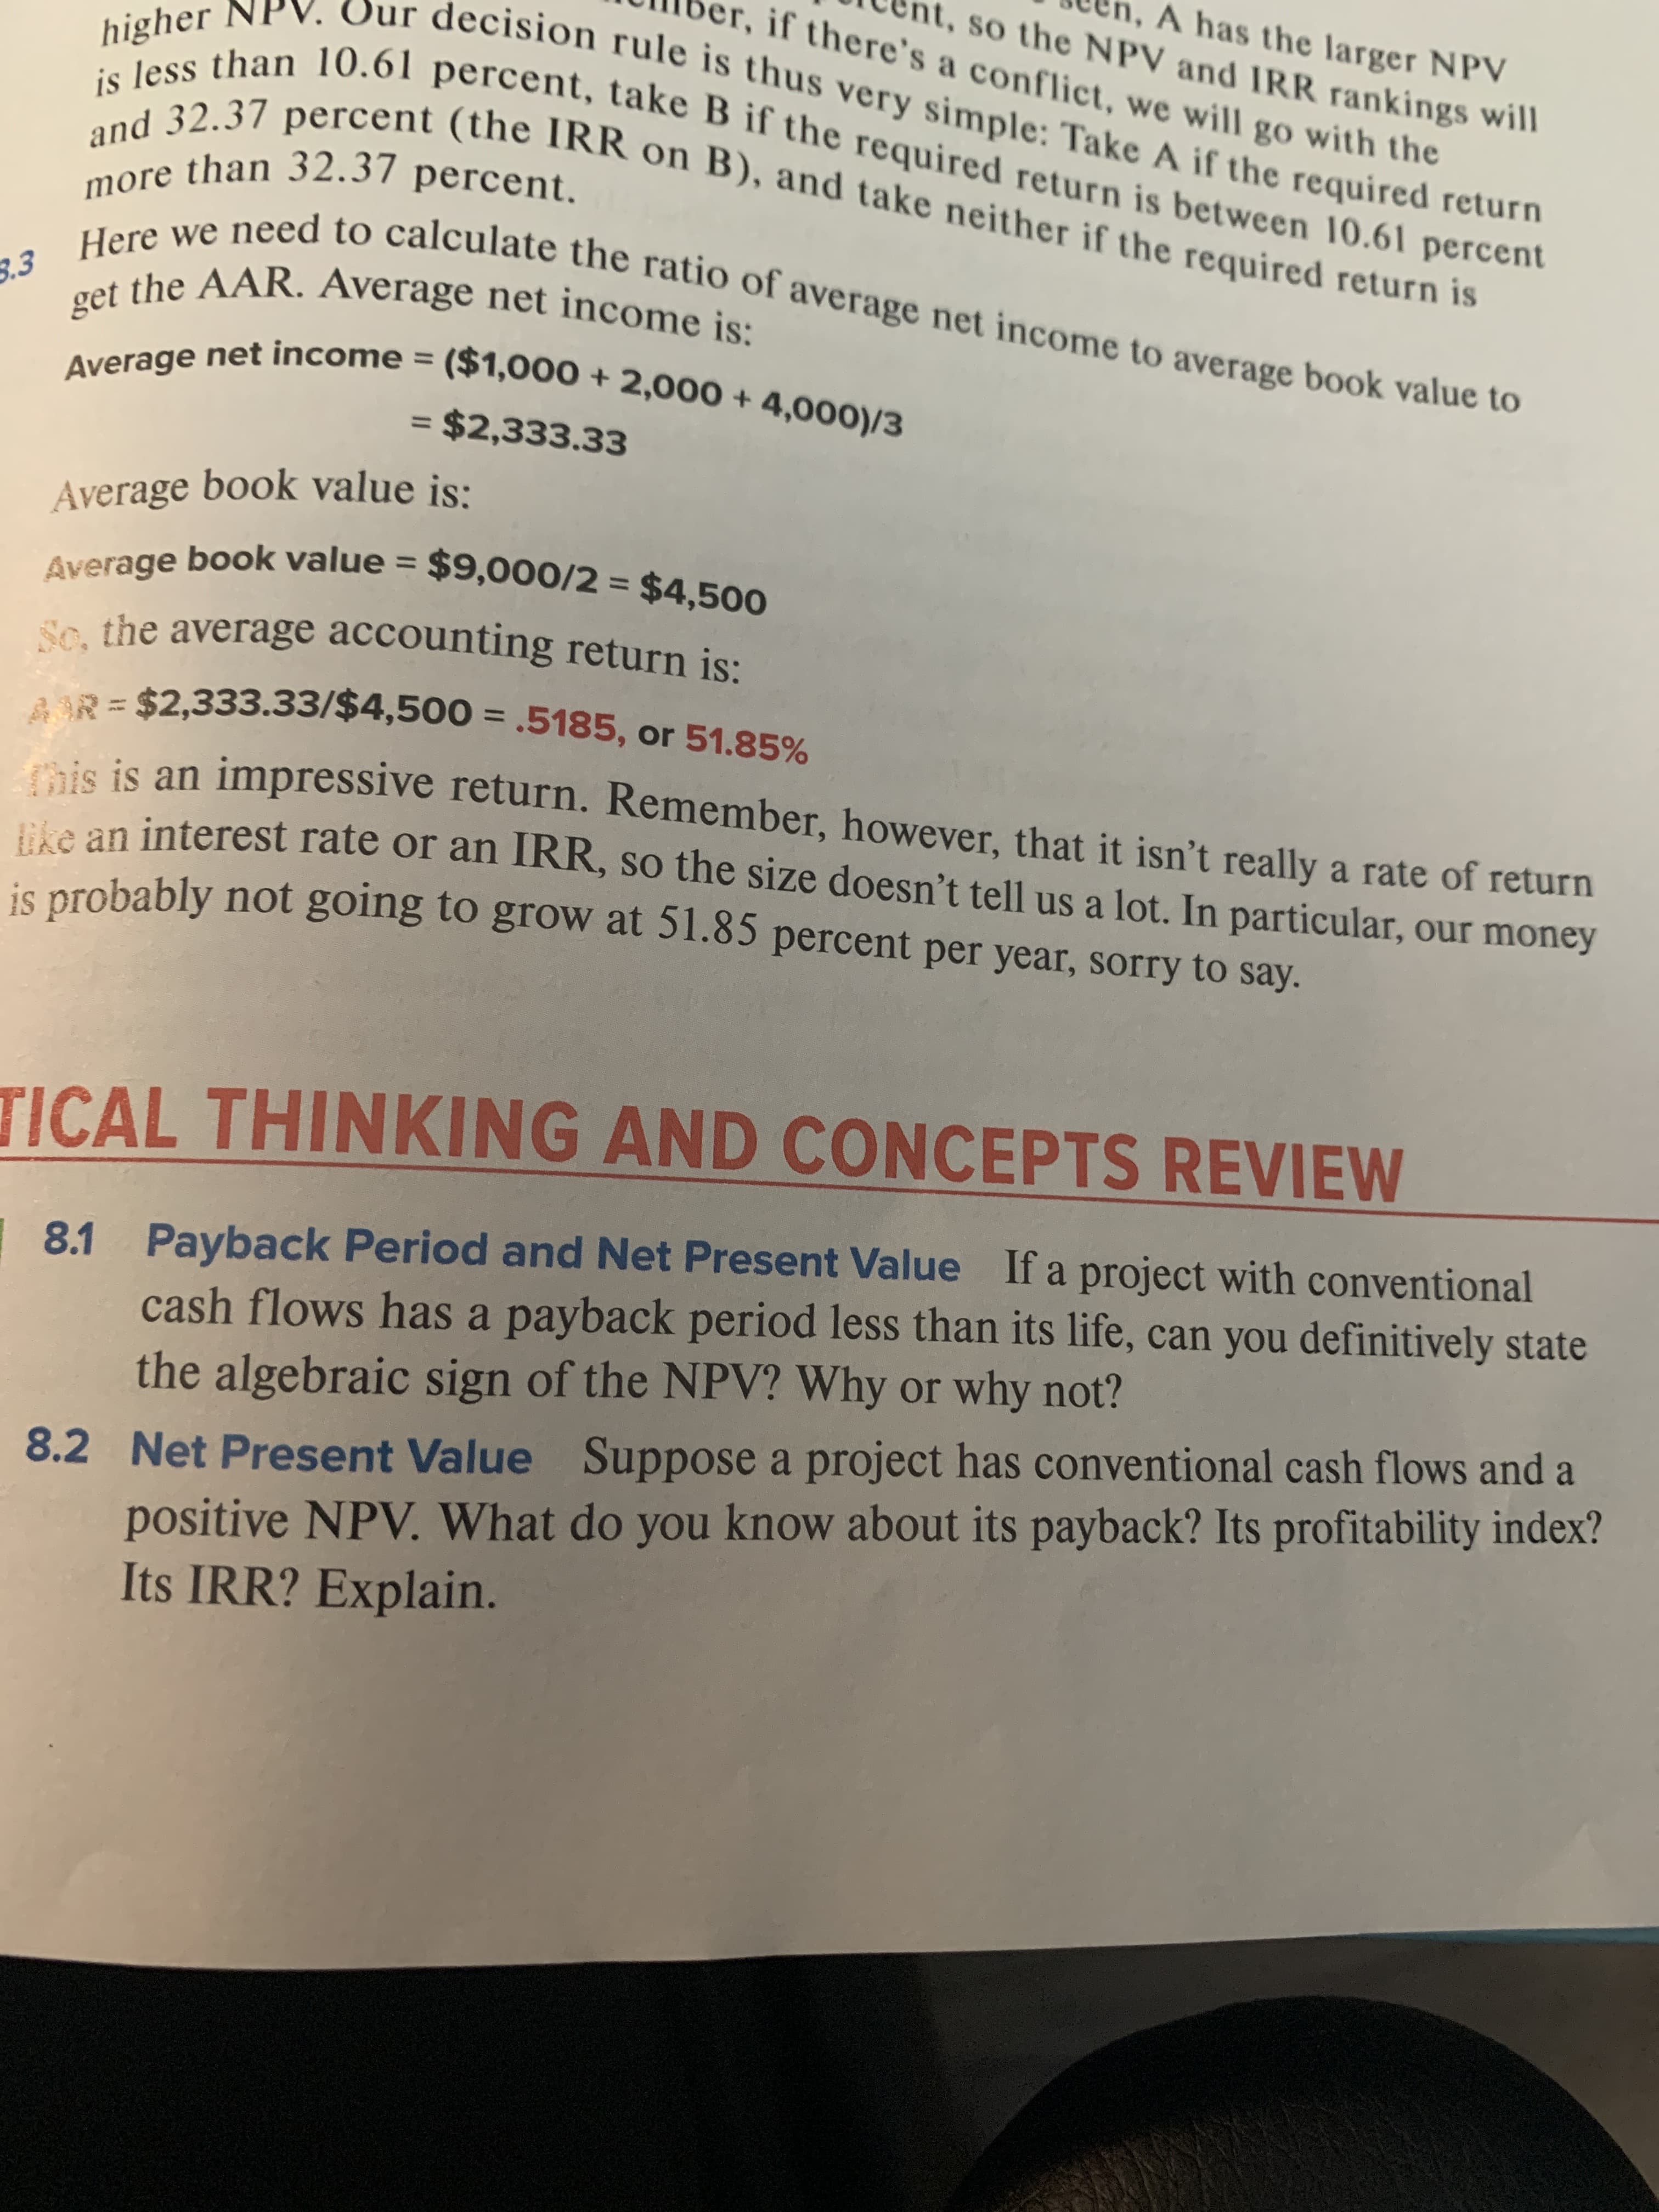 A has the larger NPV
t, so the NPV and IRR rankings will
Sur decision rule is thus very simple: Take A if the required return
if there's a conflict, we will go with the
is less than 10.61 percent, take B if the required return is between 10.61 percent
and 32.37 percent (the IRR on B), and take neither if the required return is
more than 32.37 percent.
Here we need to calculate the ratio of average net income to average book value to
higher
get the AAR. Average net income is:
Average net income = ($1,000+2,000 +4,000)/3
= $2,333.33
Average book value is:
Average book value = $9,000/2 = $4,500
Se. the average accounting return is:
1
AR=$2,333.33/$4,500 = .5185, or 51.85%
is is an impressive return. Remember, however, that it isn't really a rate of return
ike an interest rate or an IRR, so the size doesn't tell us a lot. In particular, our money
is probably not going to grOW at 51.85 percent per year, sorry to say.
TICAL THINKING AND CONCEPTS REVIEW
Payback Period and Net Present Value If a project with conventional
8.1
cash flows has a payback period less than its life, can you definitively state
the algebraic sign of the NPV? Why or why not?
8.2 Net Present Value Suppose a project has conventional cash flows and a
positive NPV. What do you know about its payback? Its profitability index?
Its IRR? Explain.
